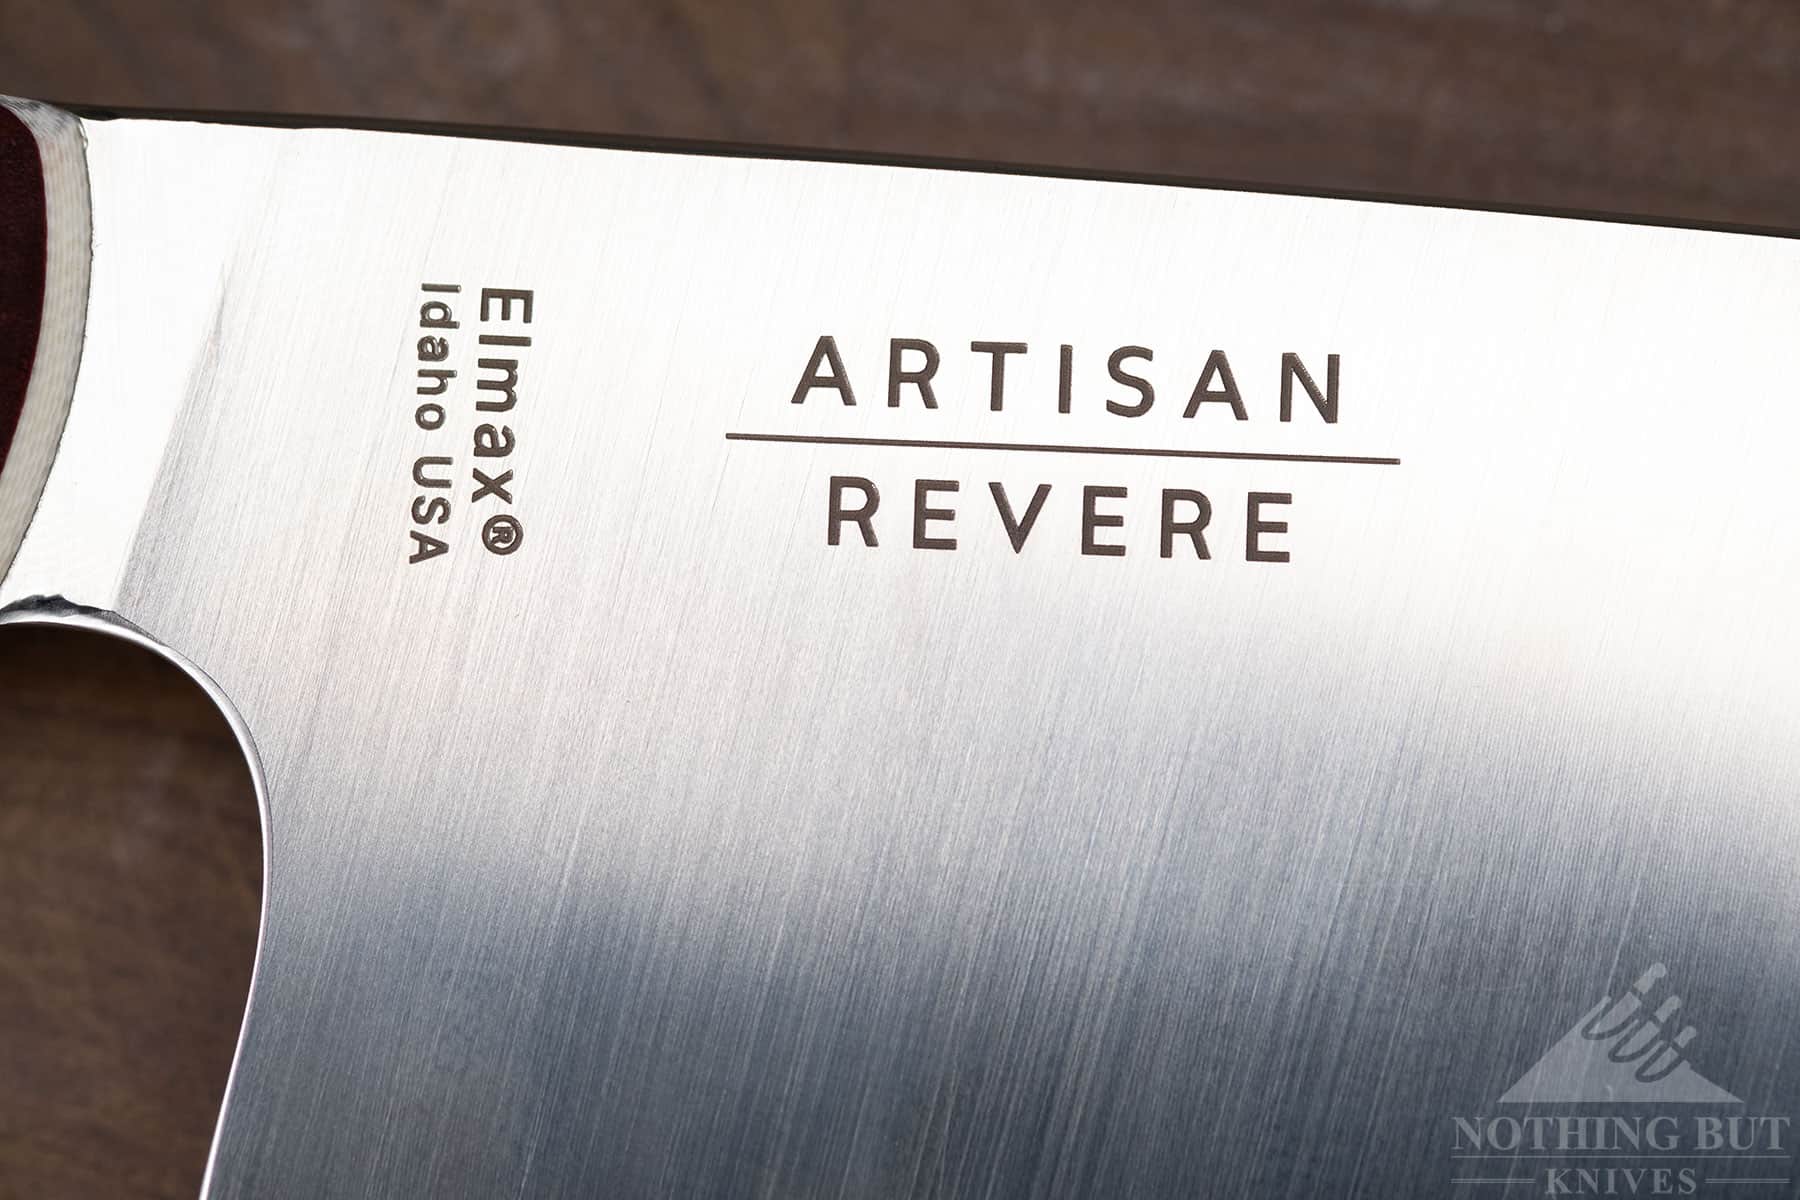 Artisan Revere is a new cutlery company that makes high performing Western style chef knives. 